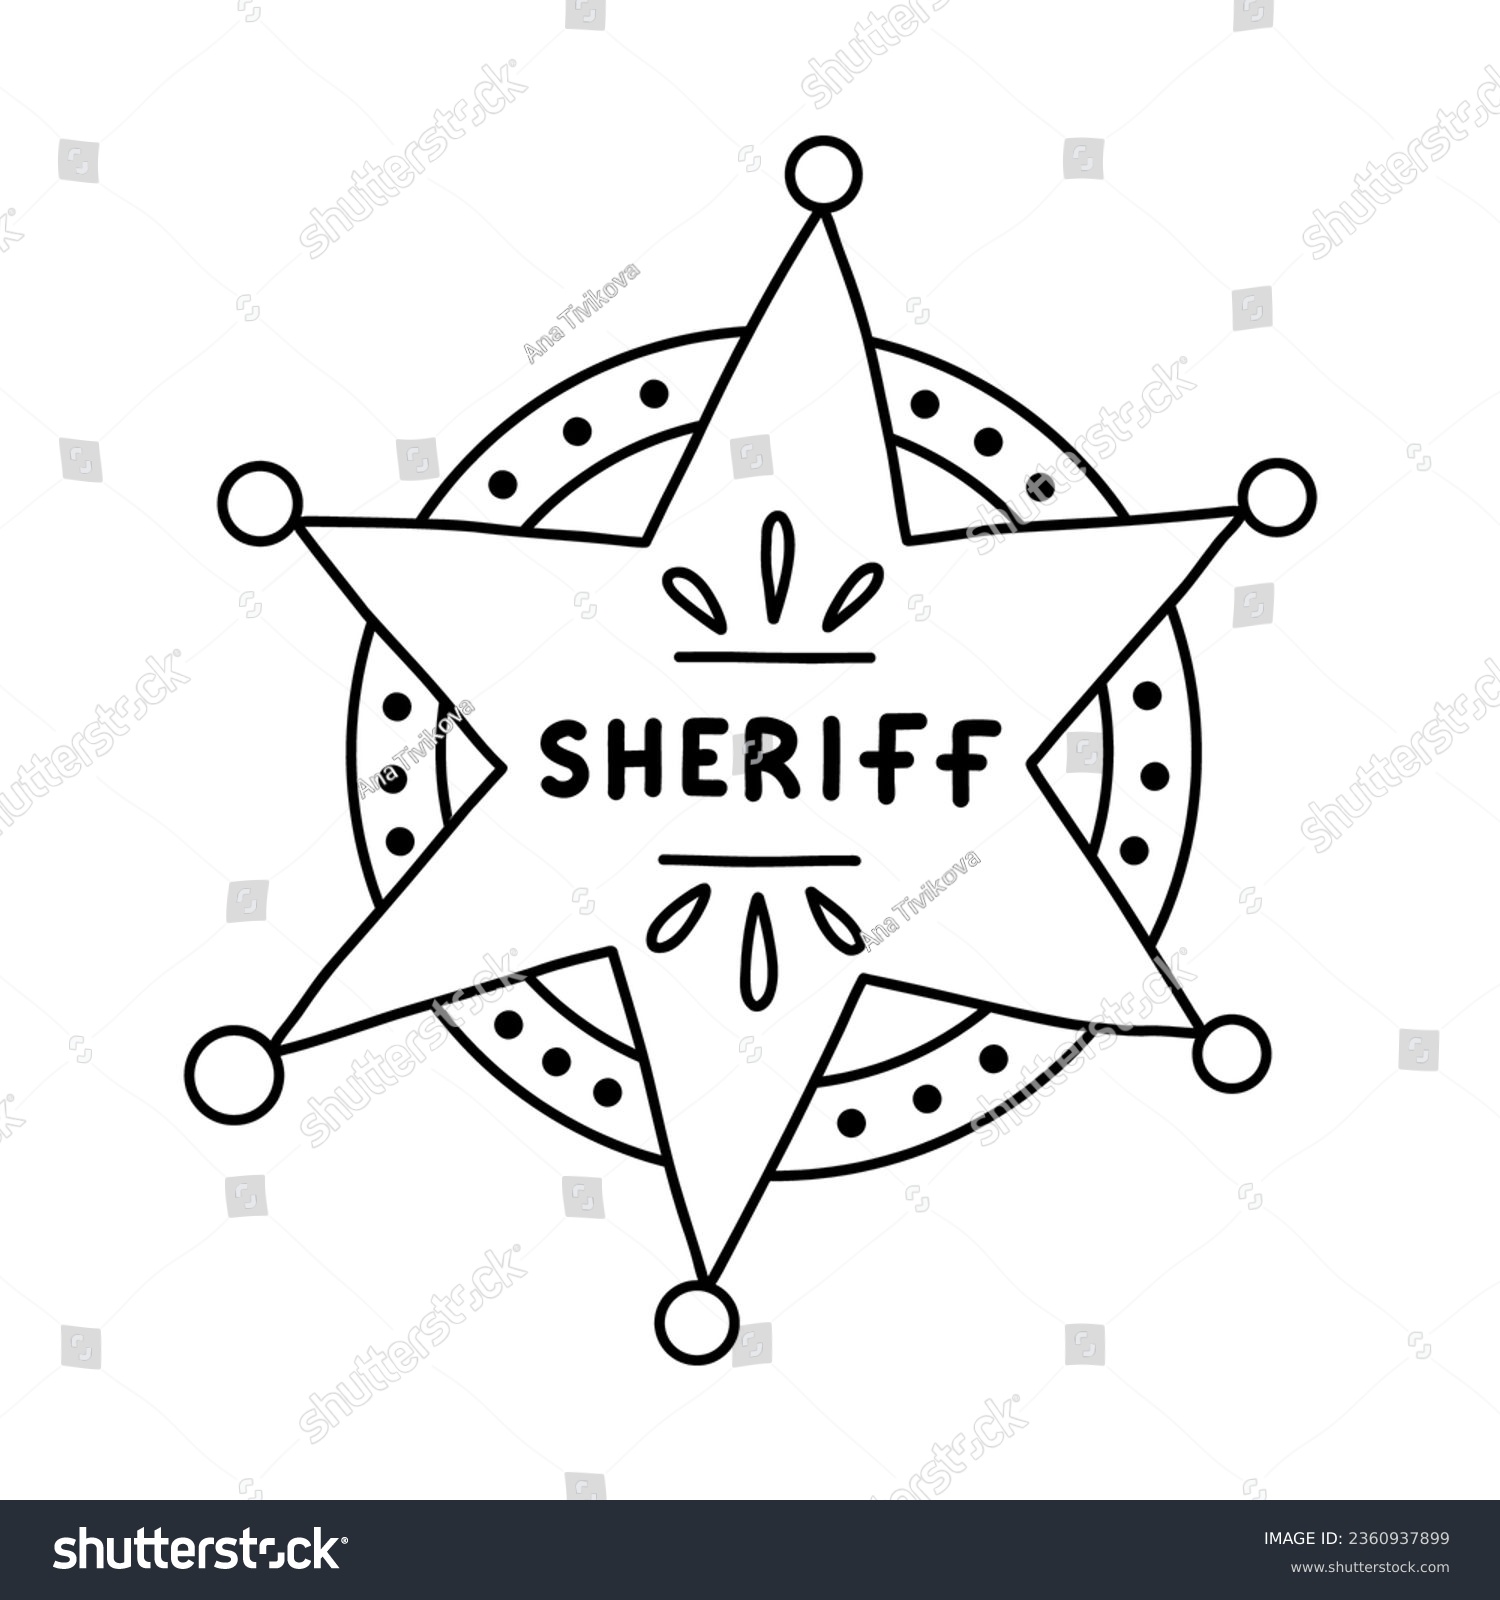 SVG of Sheriff badge doodle in the star shape with hand drawn outline. Cute hexagonal emblem of western police, sign of law, security, justice. Wild West cowboy symbol with shields isolated on background svg